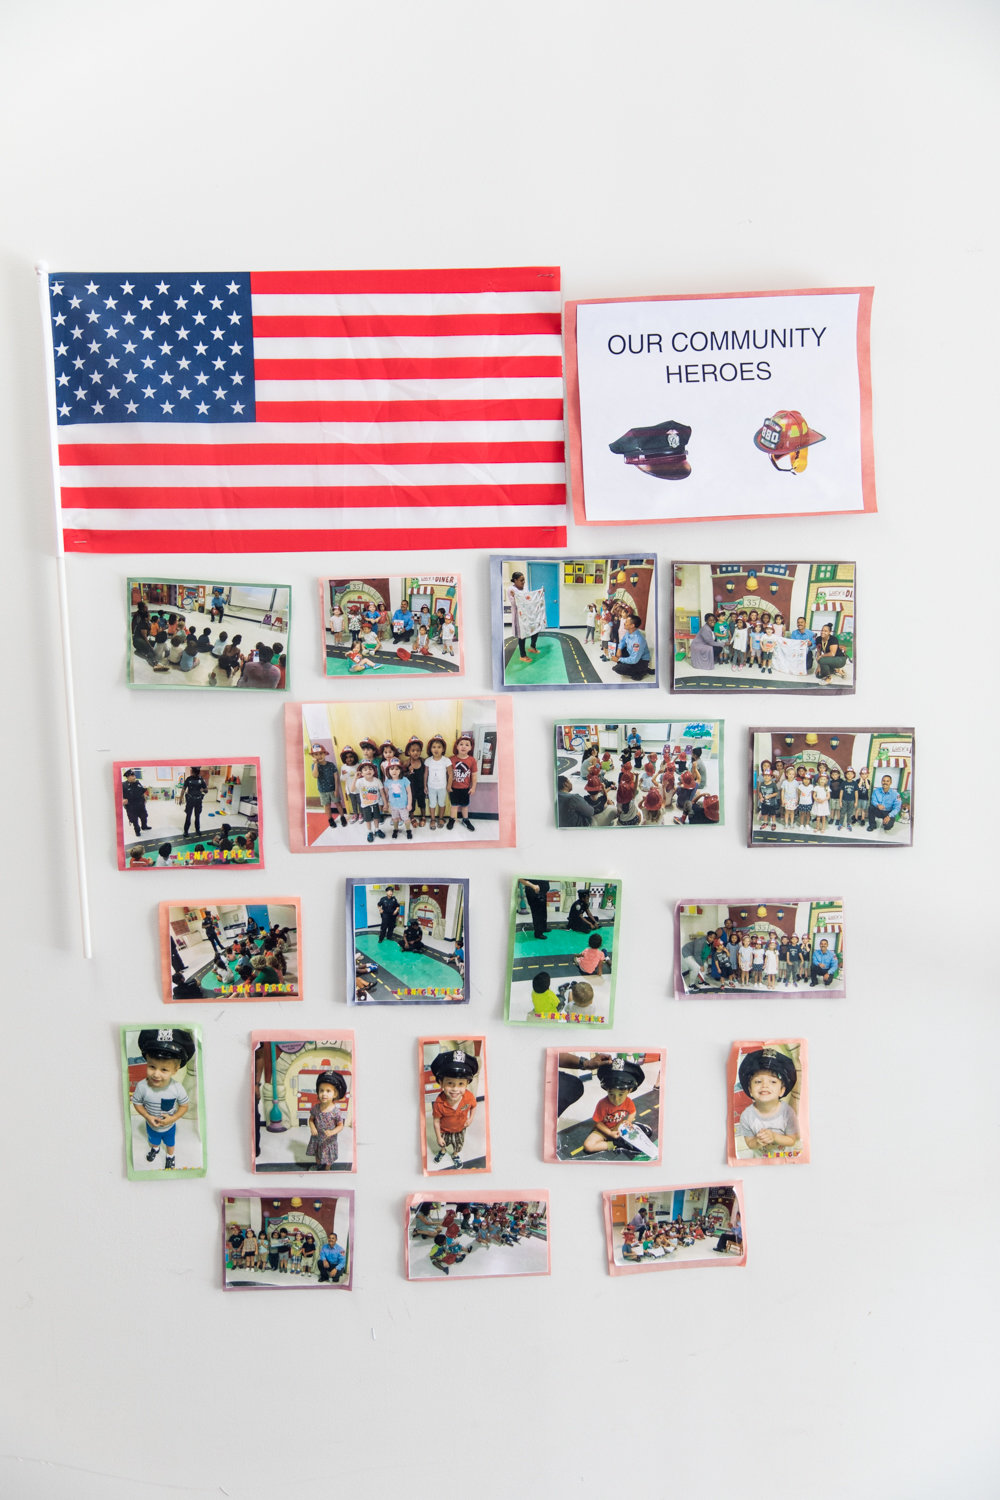 A wall of photographs honors community heroes inside the entrance of The Learning Experience, which is providing day care to the children of essential workers.